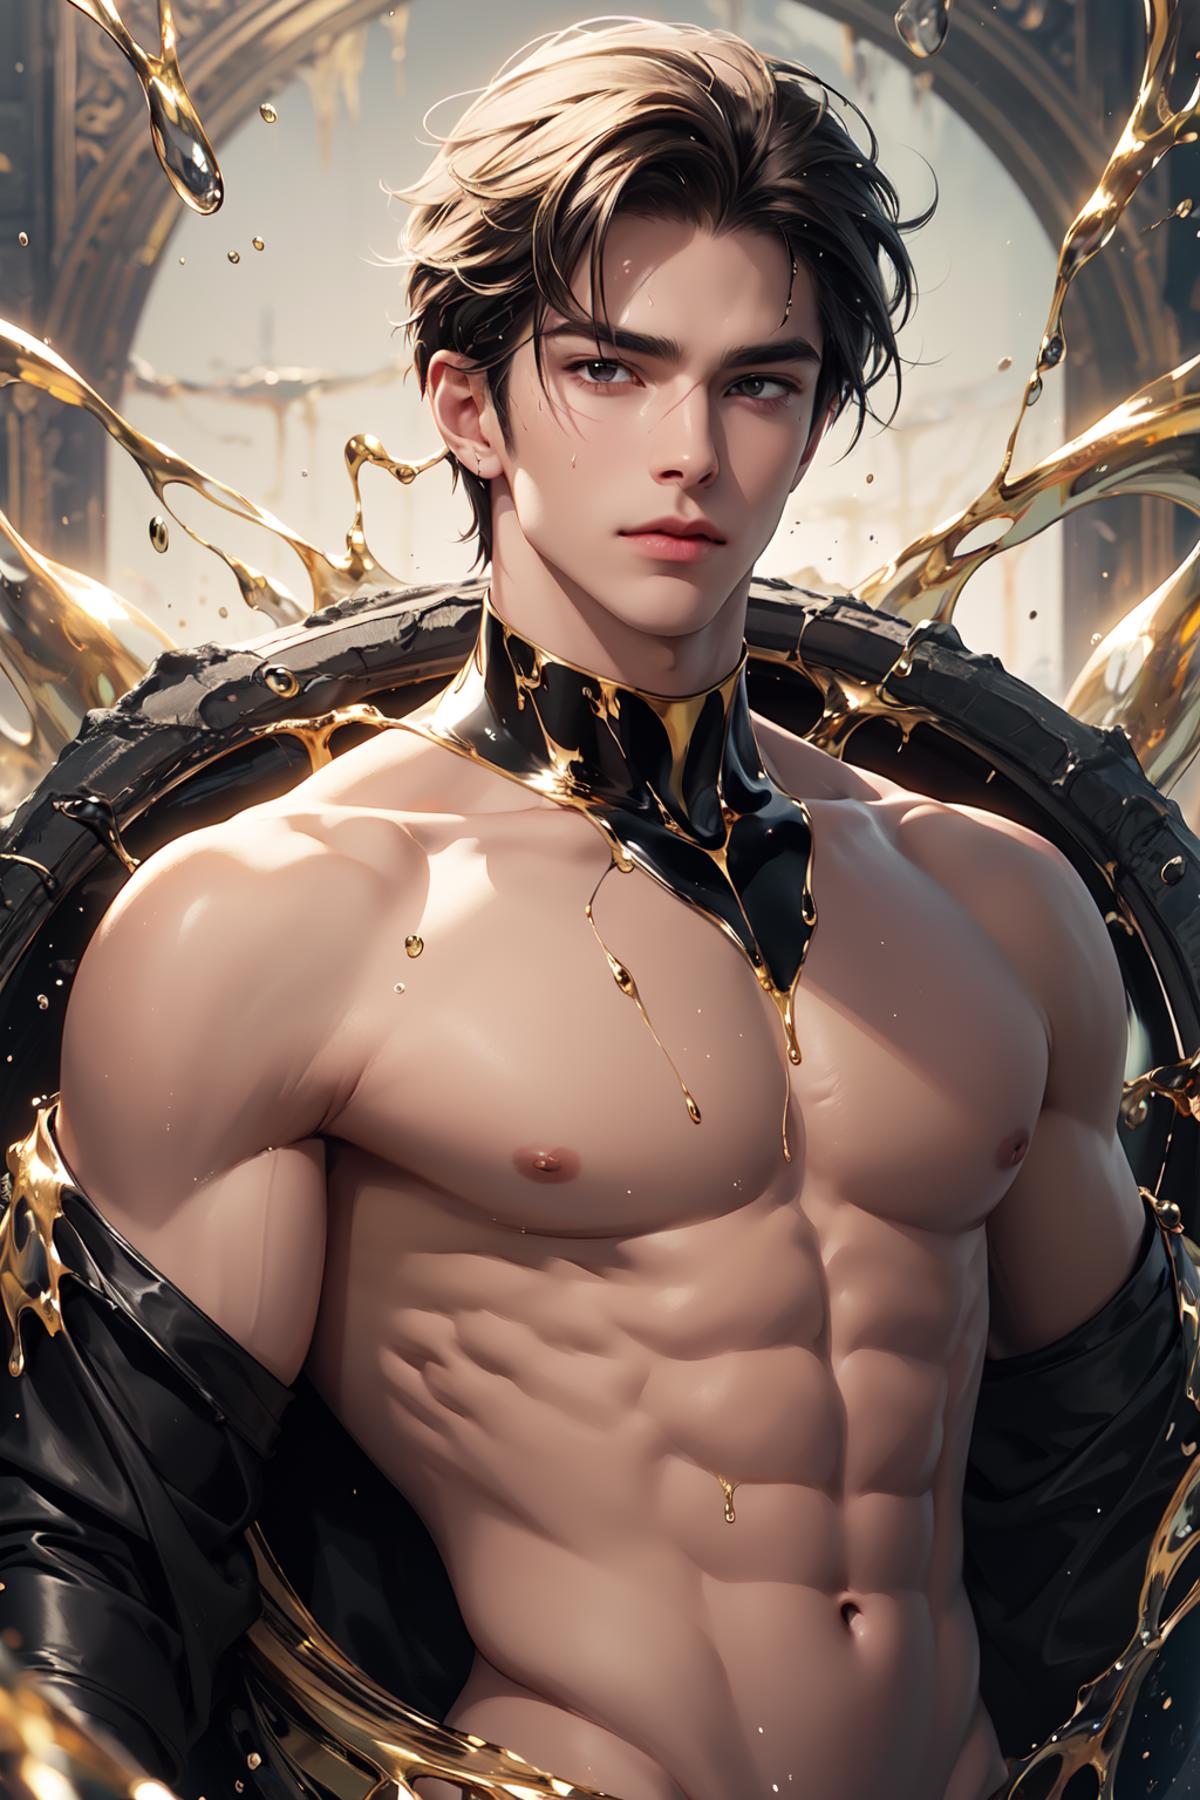 A shirtless male anime character with gold colored drips on his arm and chest.